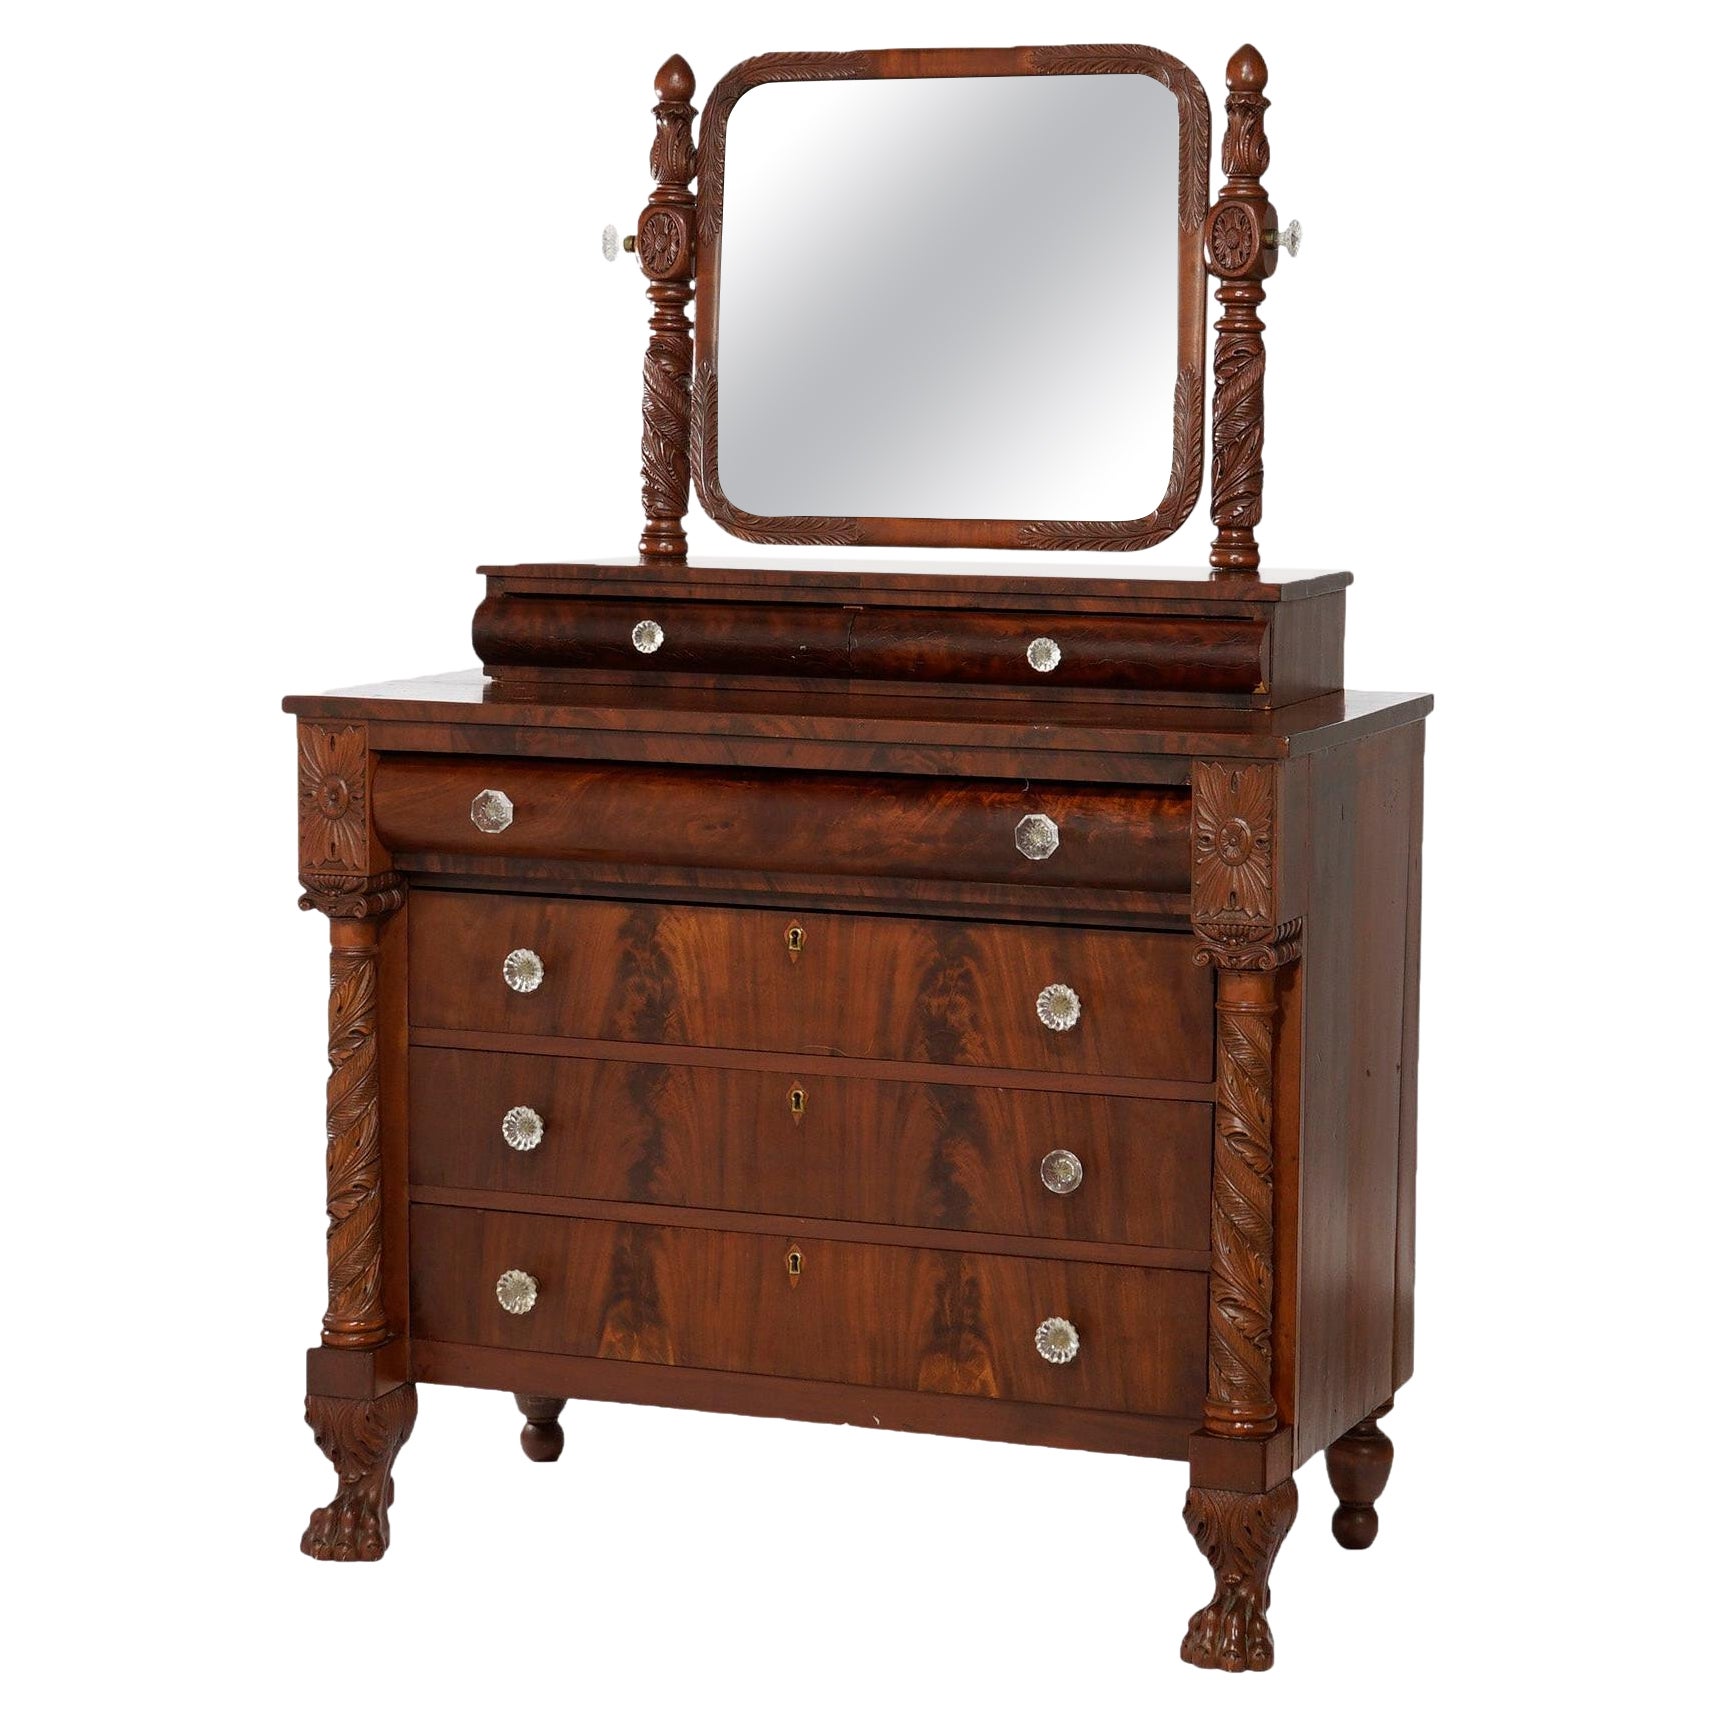 Antique American Empire Carved Flame Mahogany Dresser with Mirror, Circa 1840 For Sale